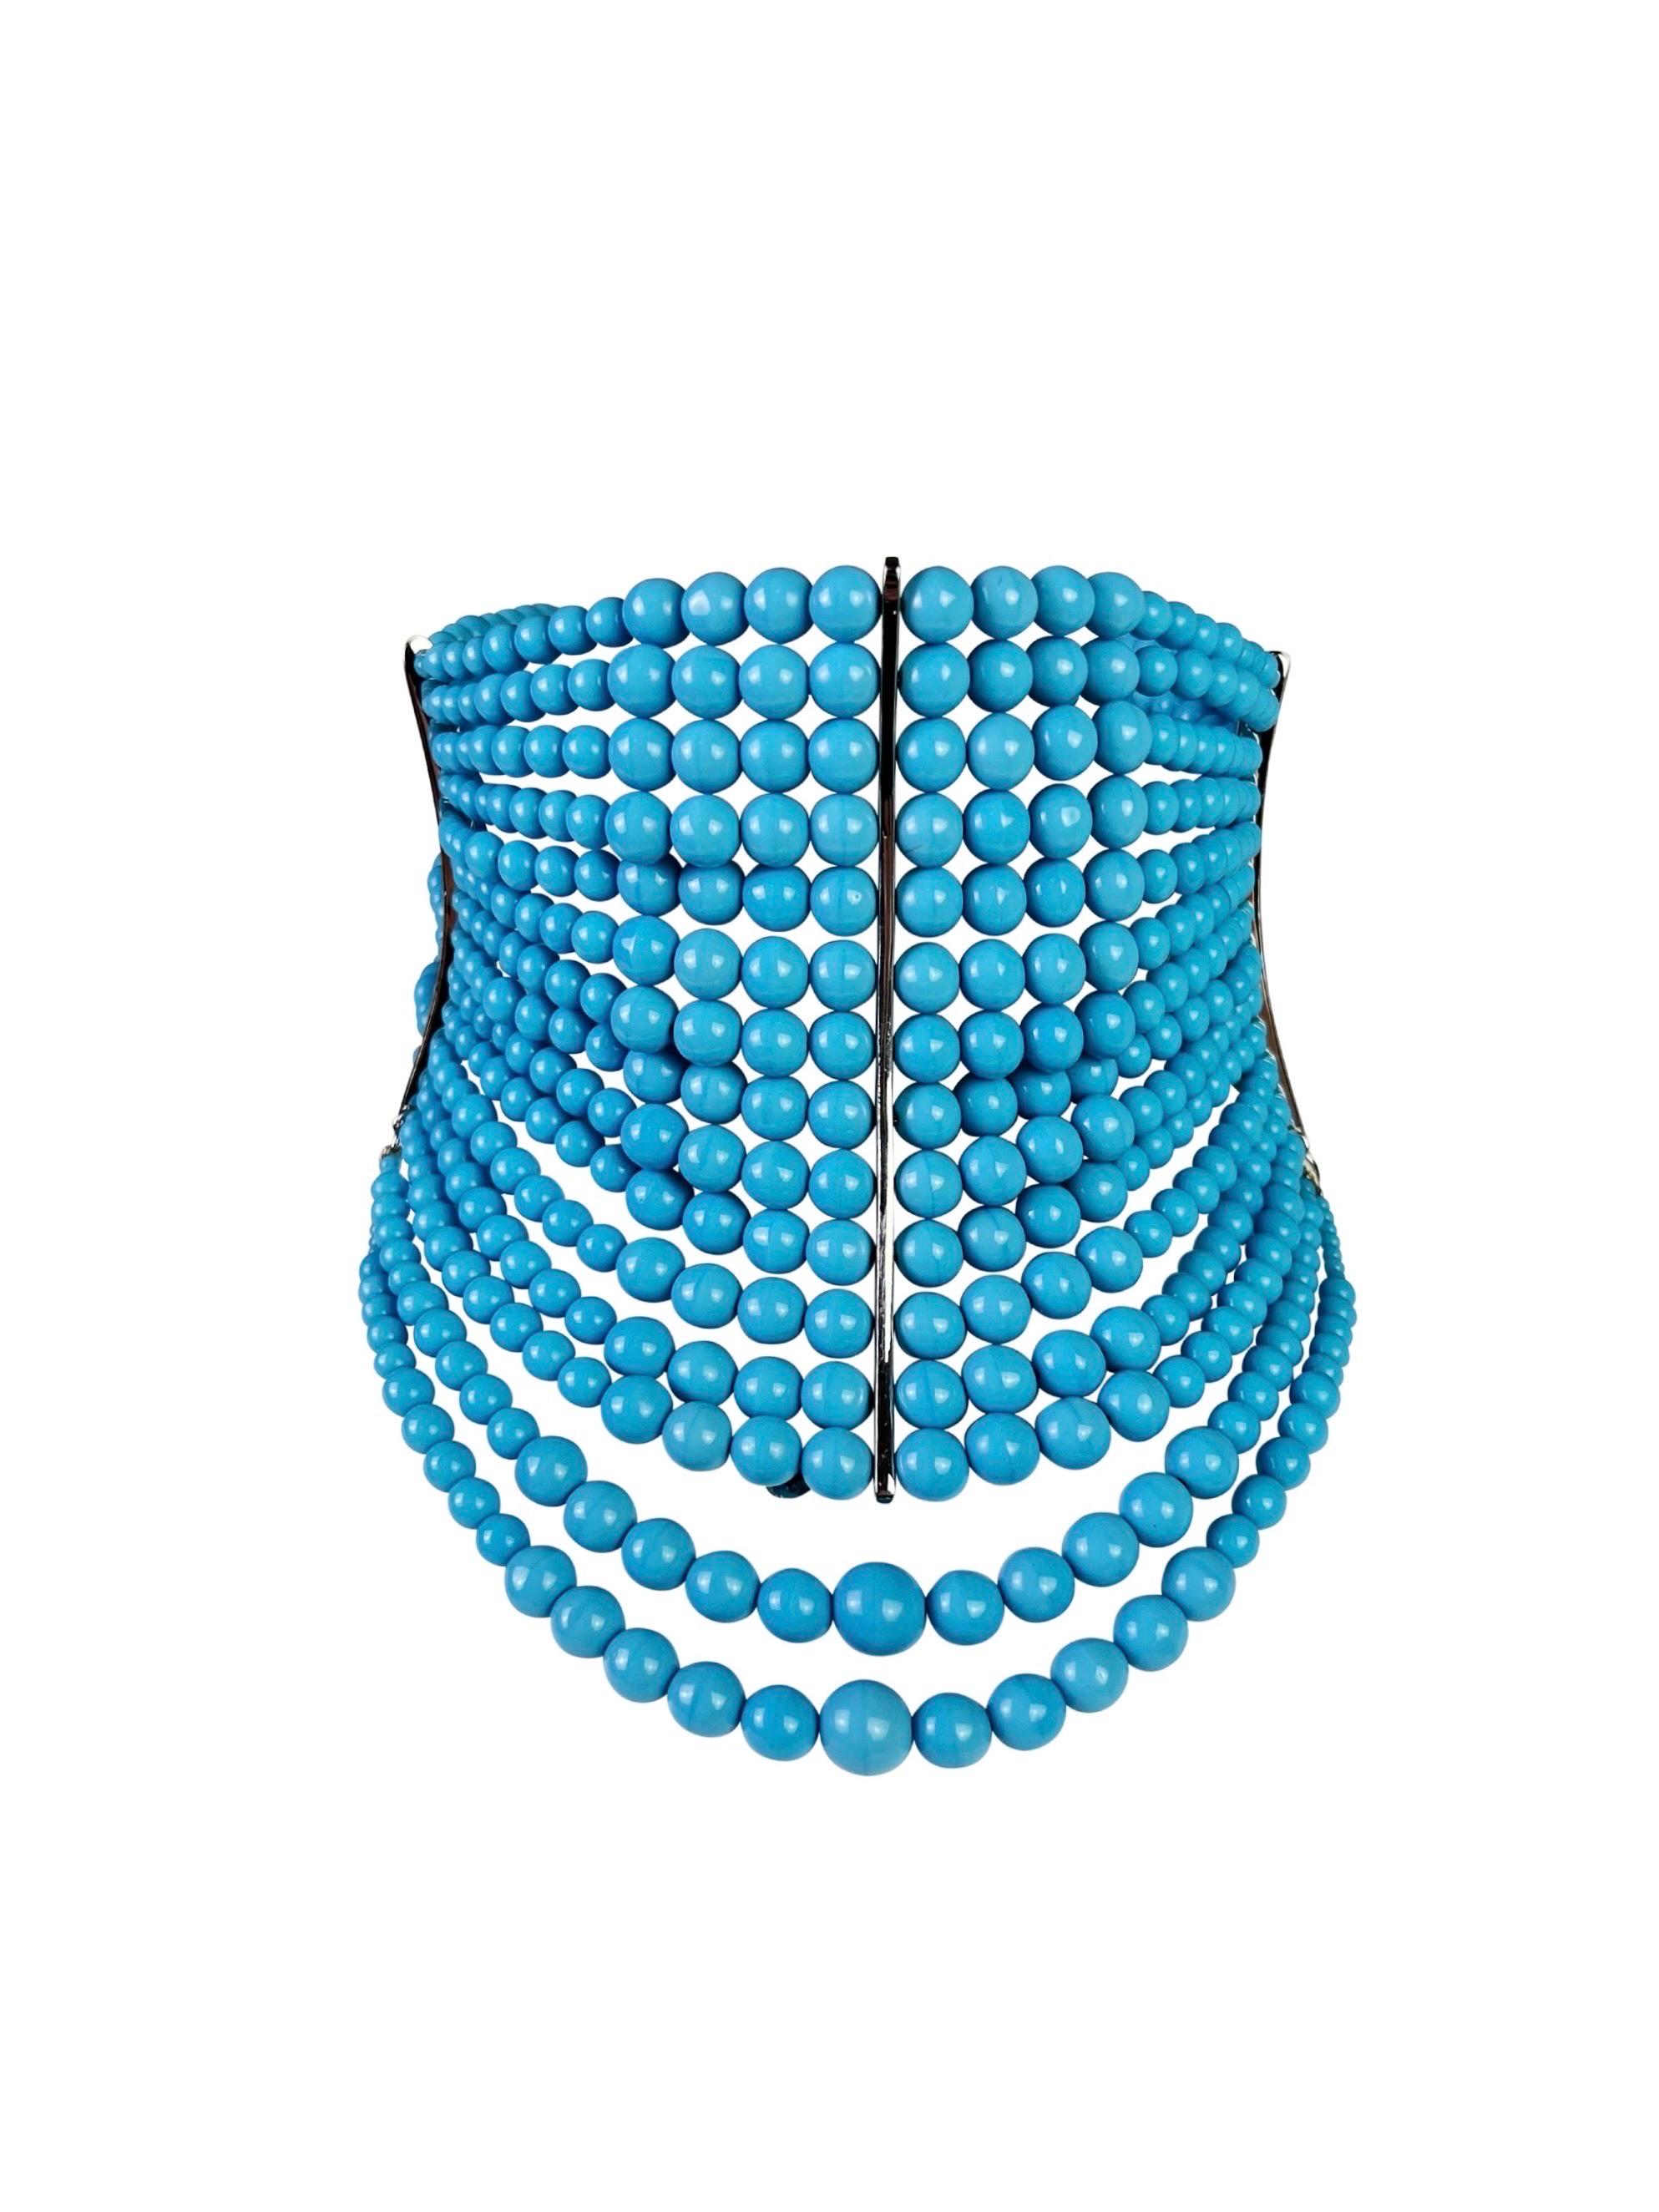 A truly iconic Dior Masai necklace in a stunning opaque blue glass and silver-toned hardware. A similar style was seen recently on Rihanna. 

Length - 32-38 cm (12,5-15 in)
Height - 10 cm (4 in)
Excellent vintage condition.